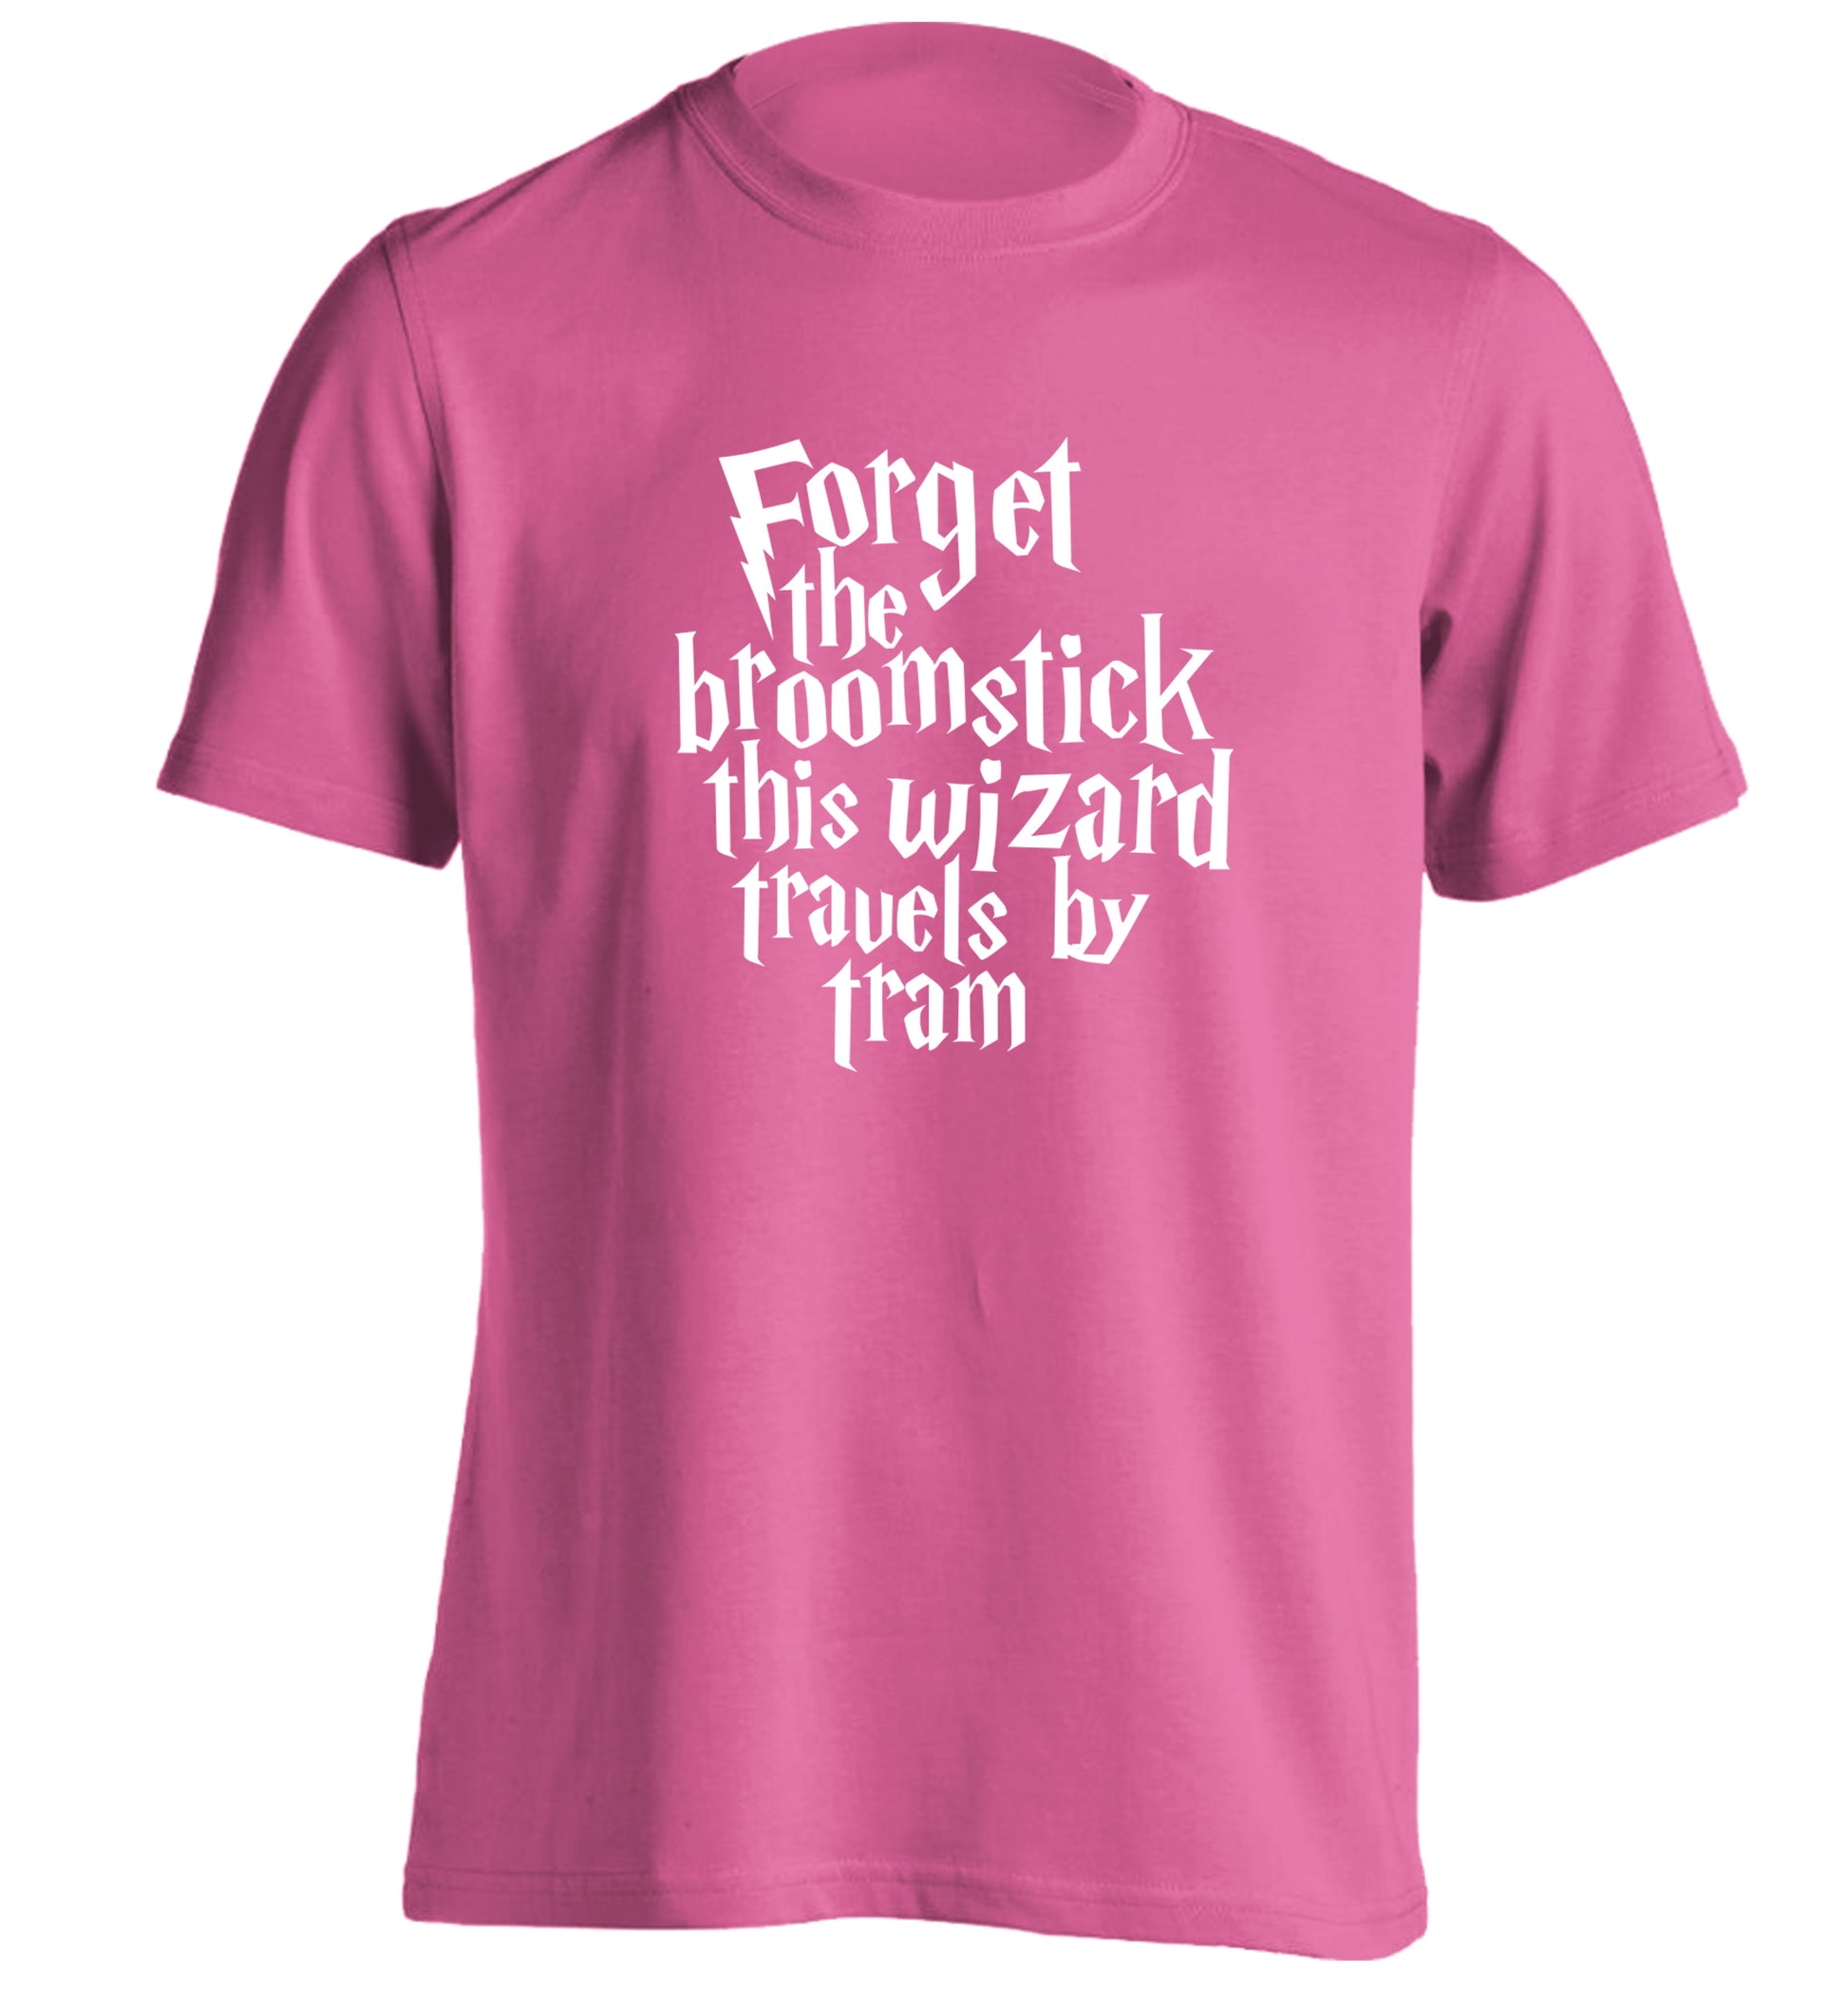 Forget the broomstick this wizard travels by tram adults unisexpink Tshirt 2XL